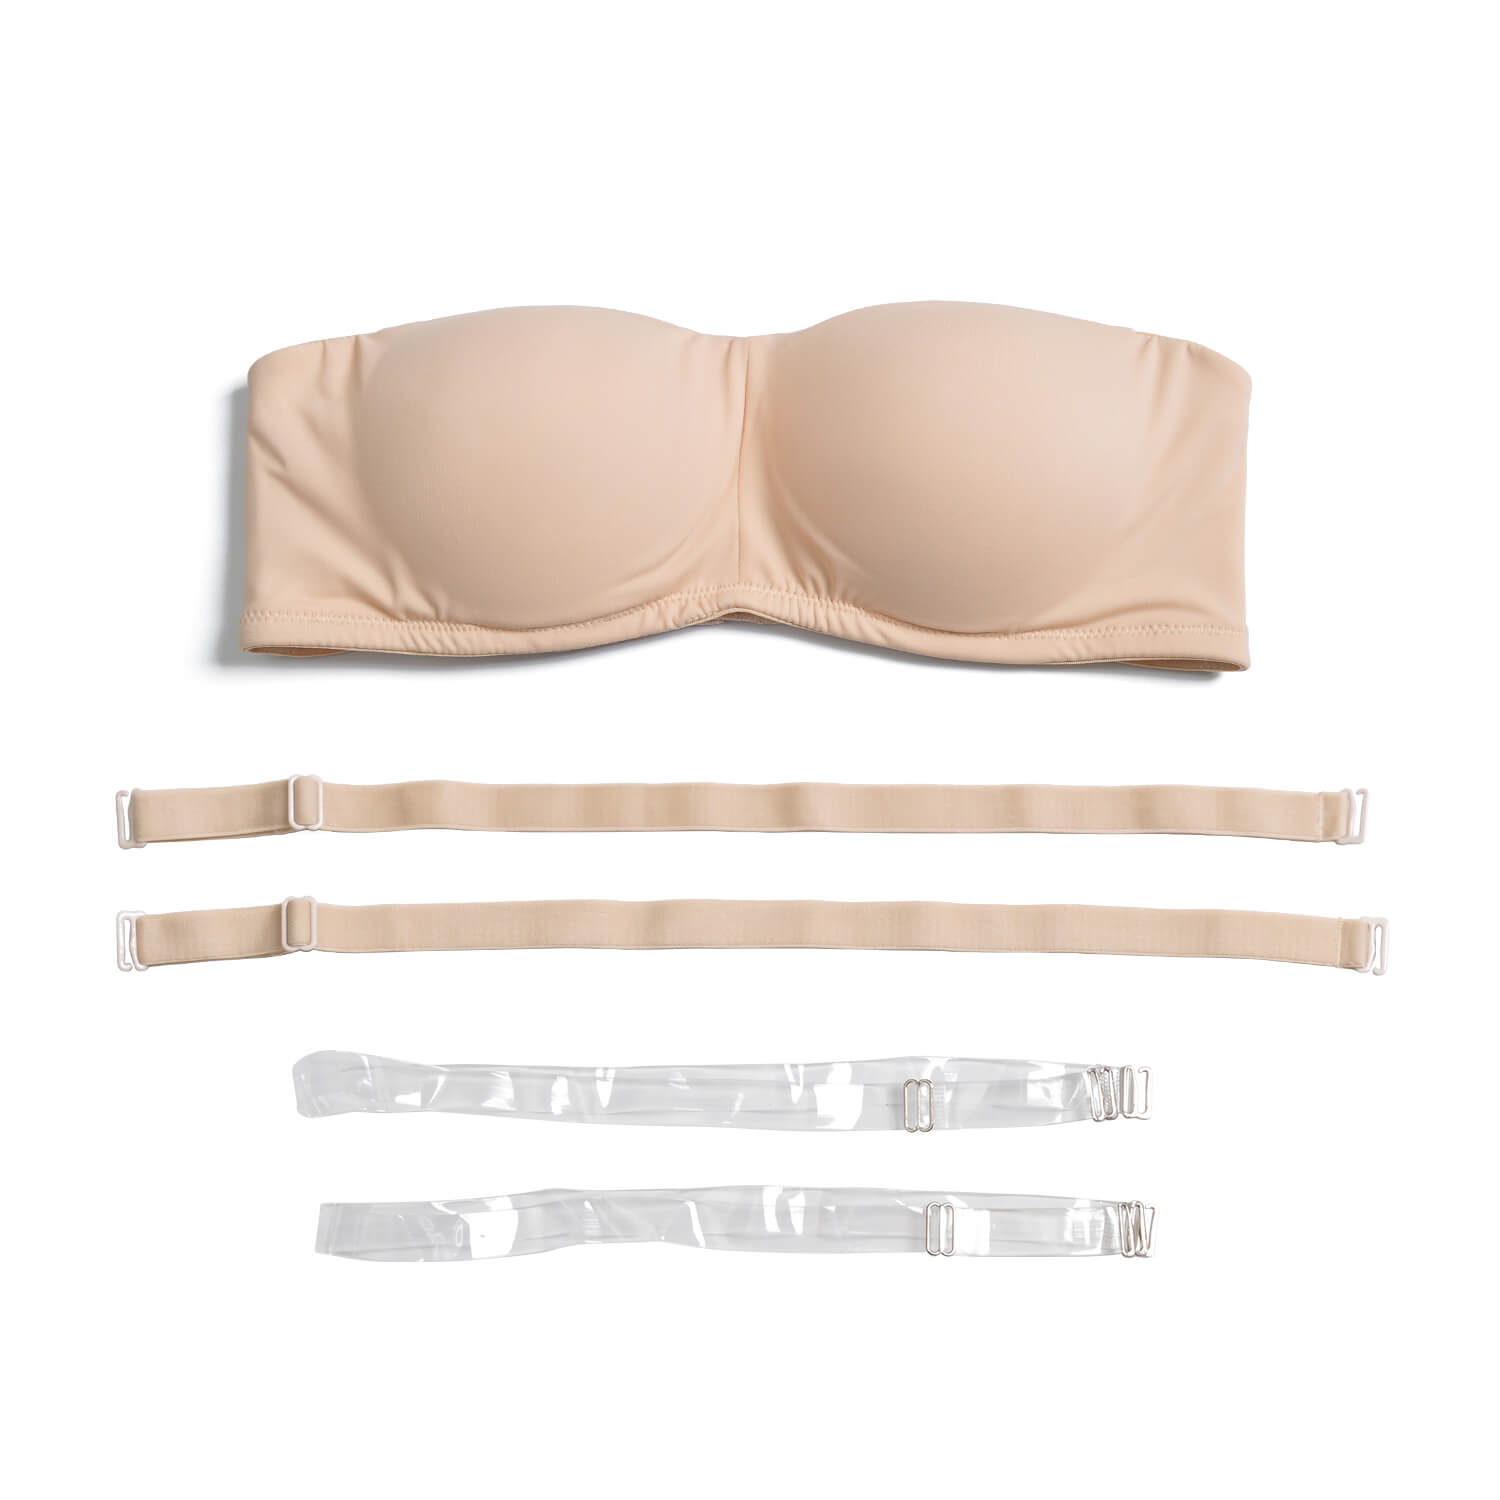  strapless convertible bandeau bra with color straps and clear straps